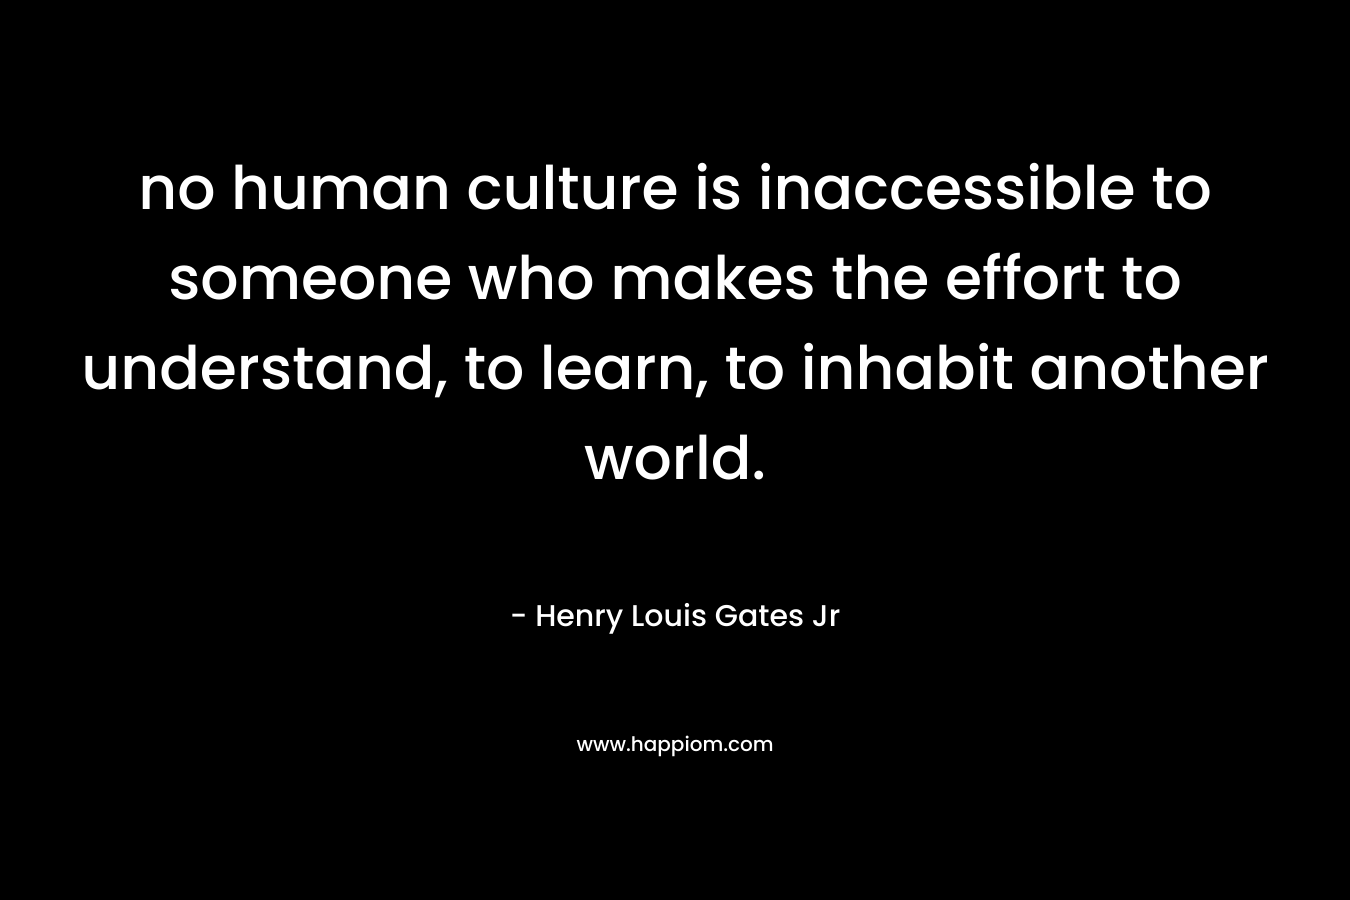 no human culture is inaccessible to someone who makes the effort to understand, to learn, to inhabit another world.